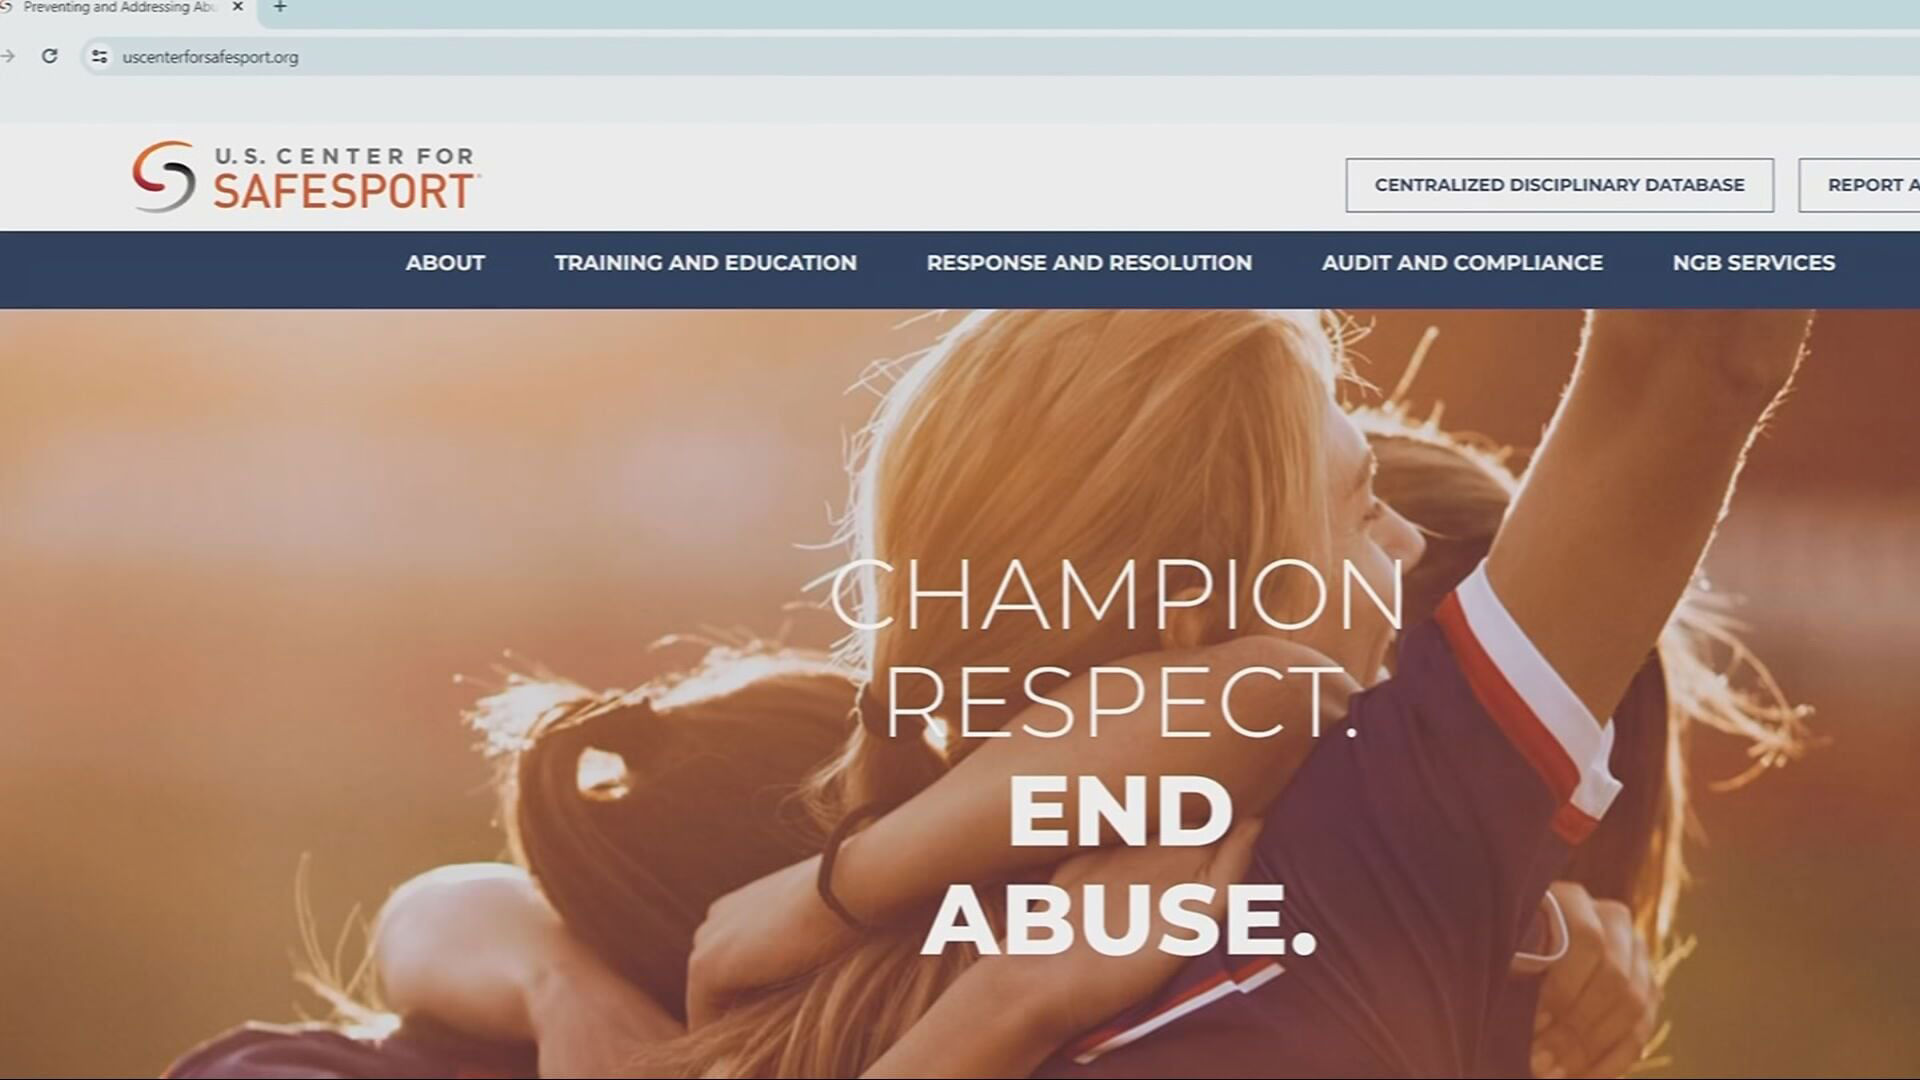 Three Names Added To U.S. Center For SafeSport Disciplinary Database